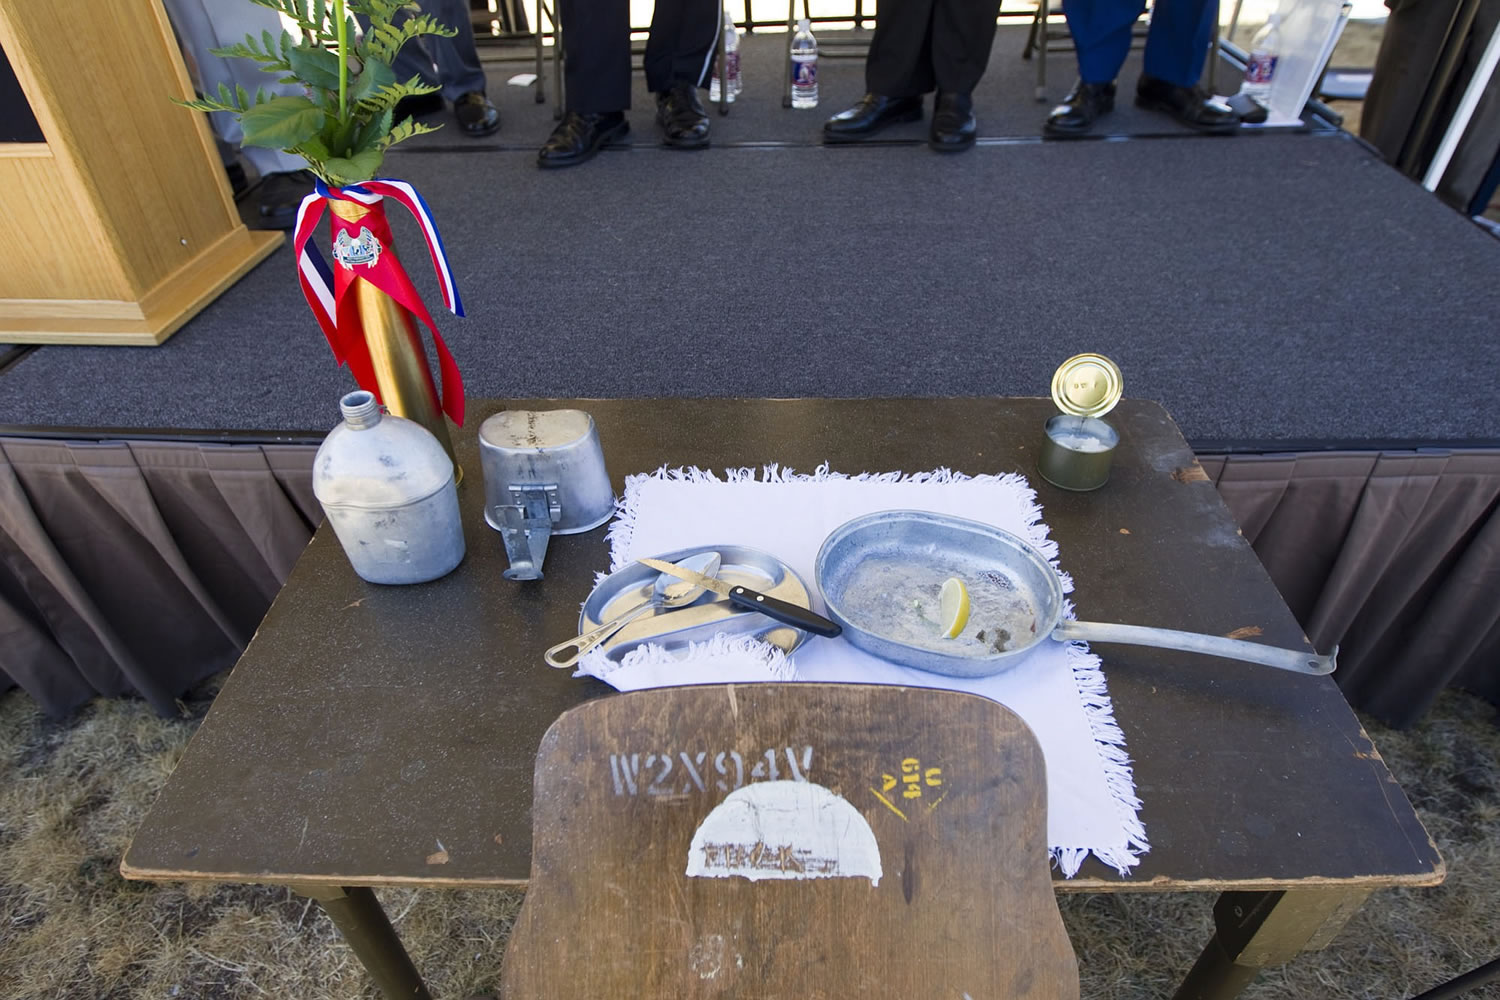 A table is set for one to symbolize POW and MIA soldiers at the dedication of a new POW/MIA memorial at the Armed Forces Reserve Center in Vancouver Saturday September 20 2014.